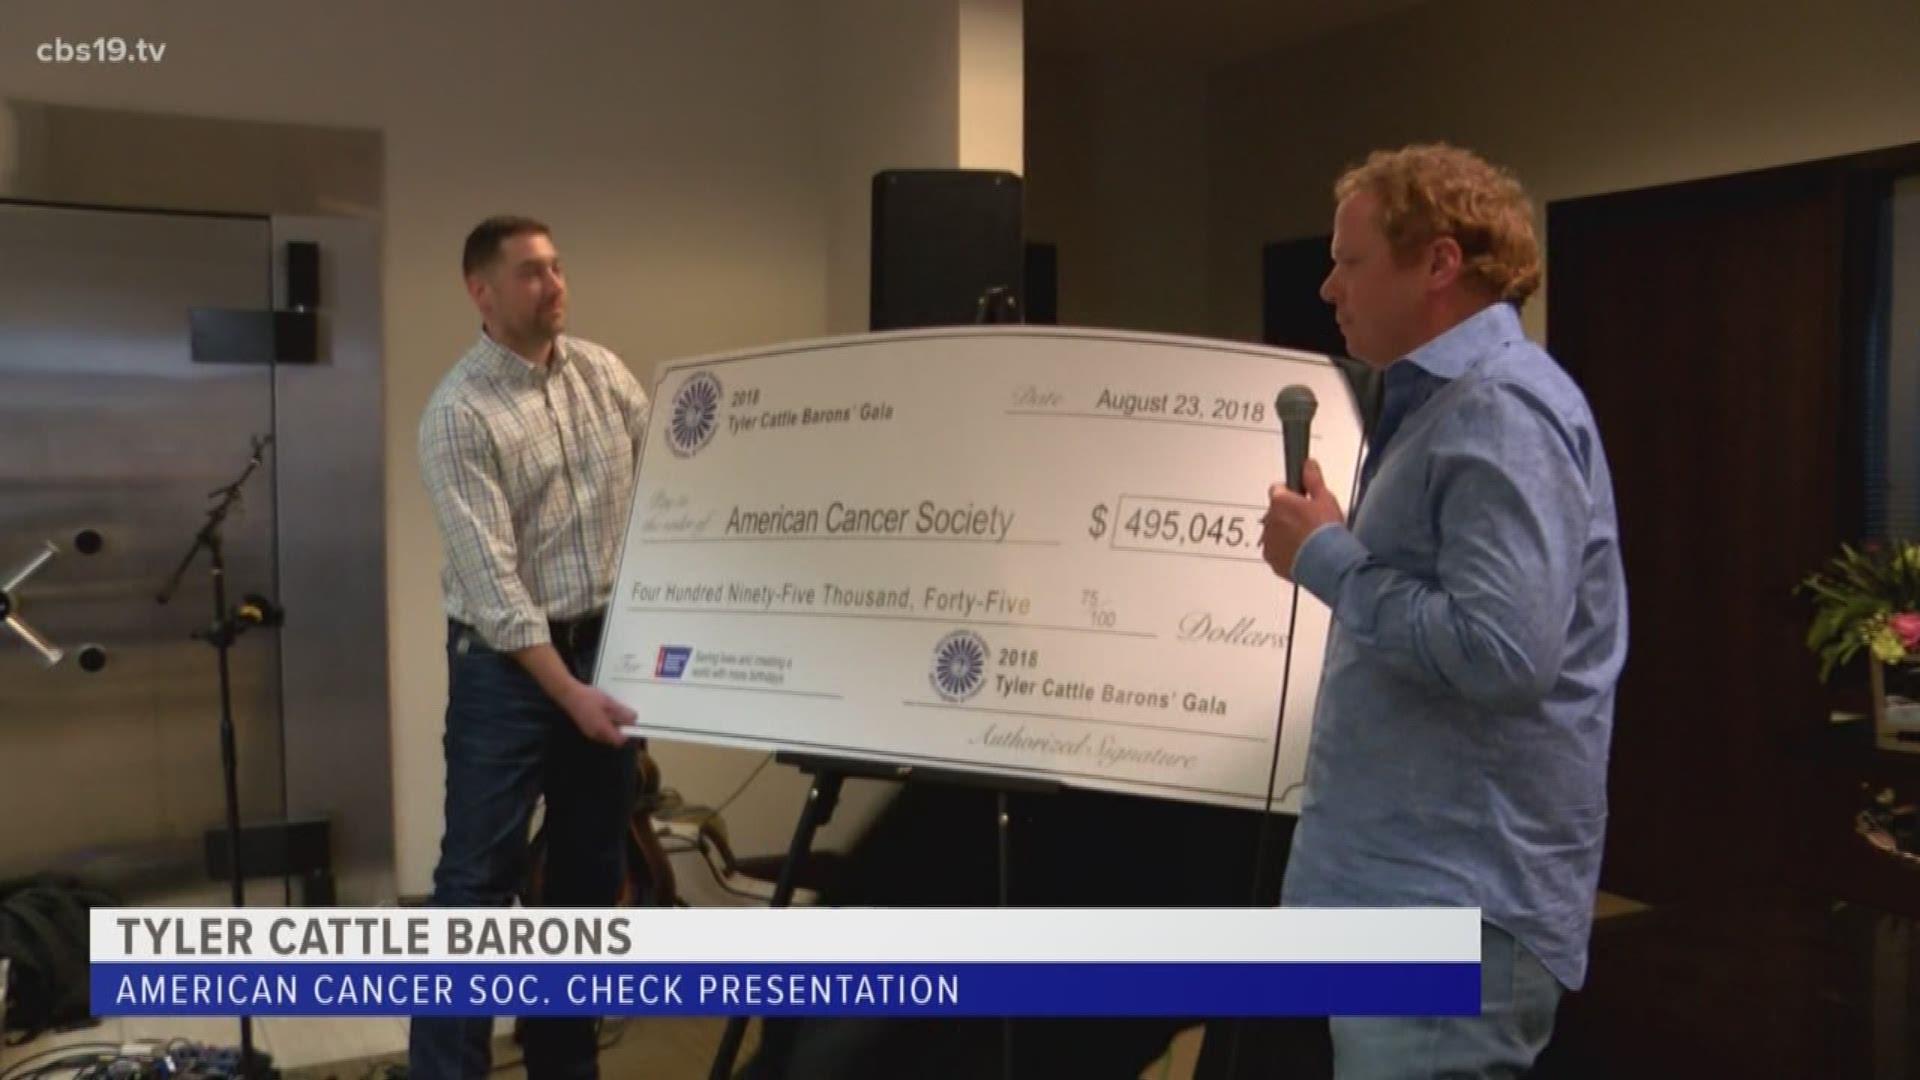 Members of the 2018 Tyler Cattle Barons committee unveiled a check for almost $500,000 for the American Cancer Society during a celebration in Tyler Thursday evening.  They also used the event to announce the 2019 gala's theme "Triple Crown, On Track For